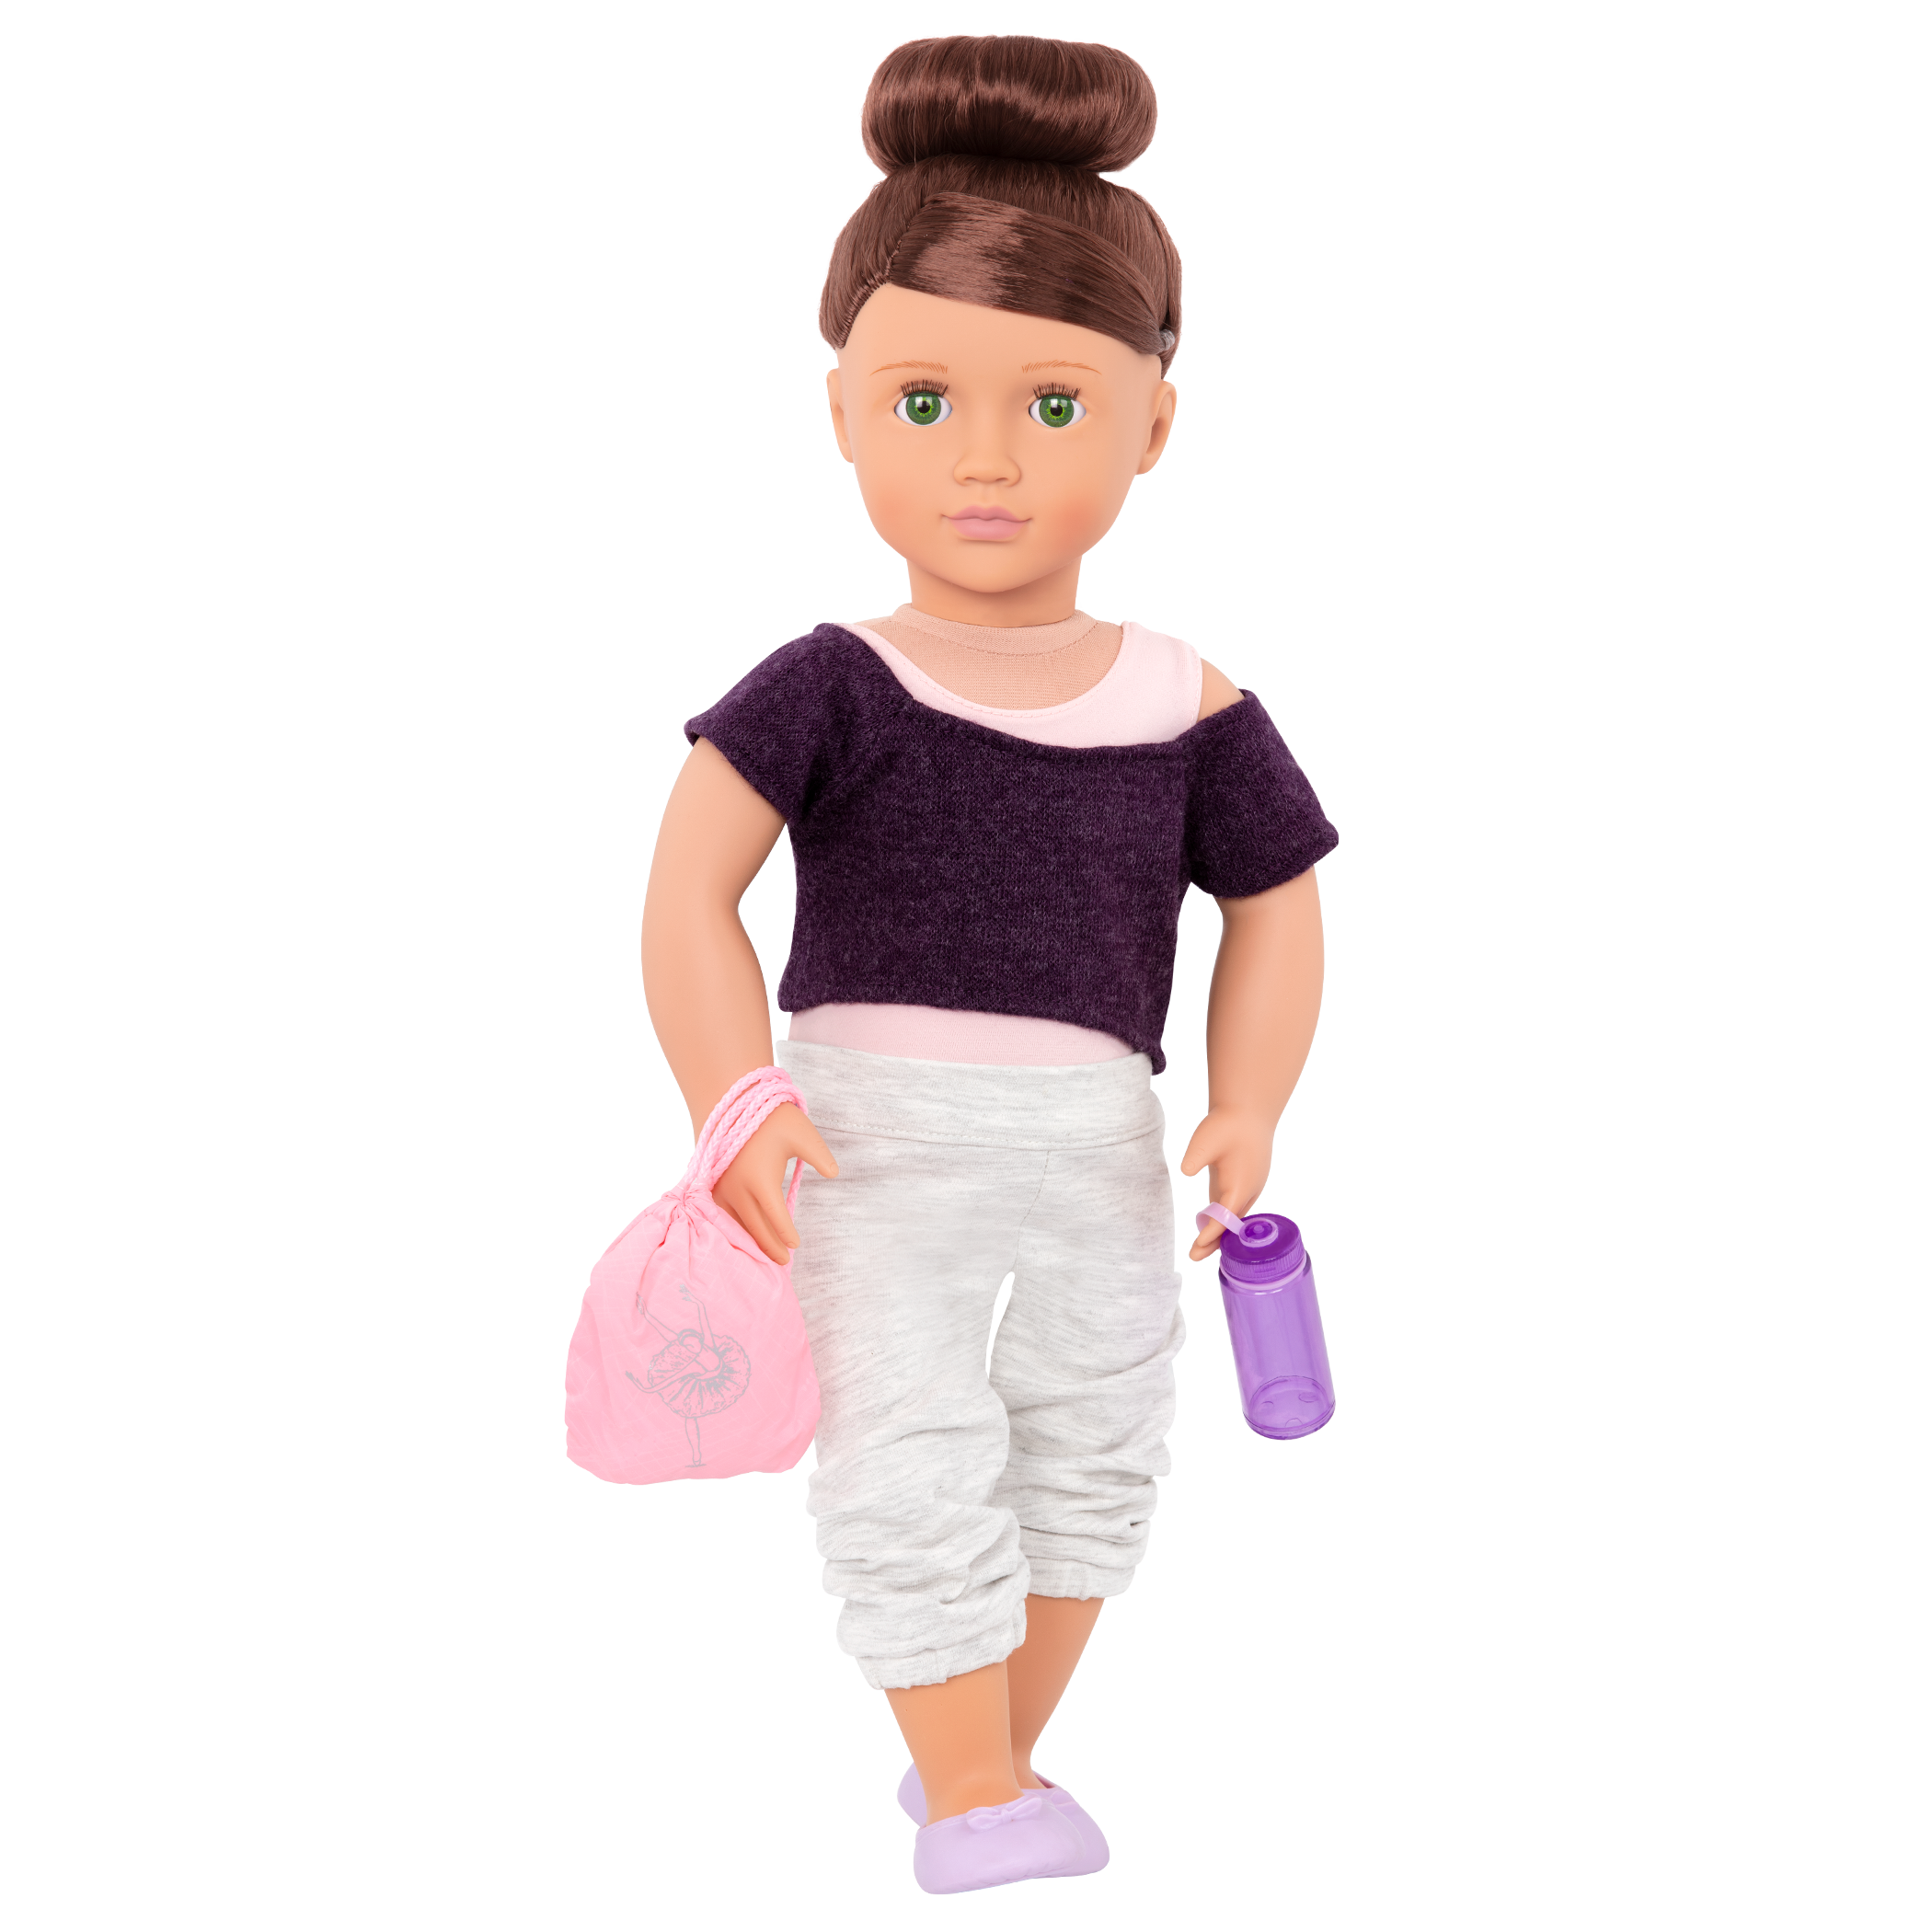 18-inch doll with brown hair, green eyes, ballerina accessories and storybook